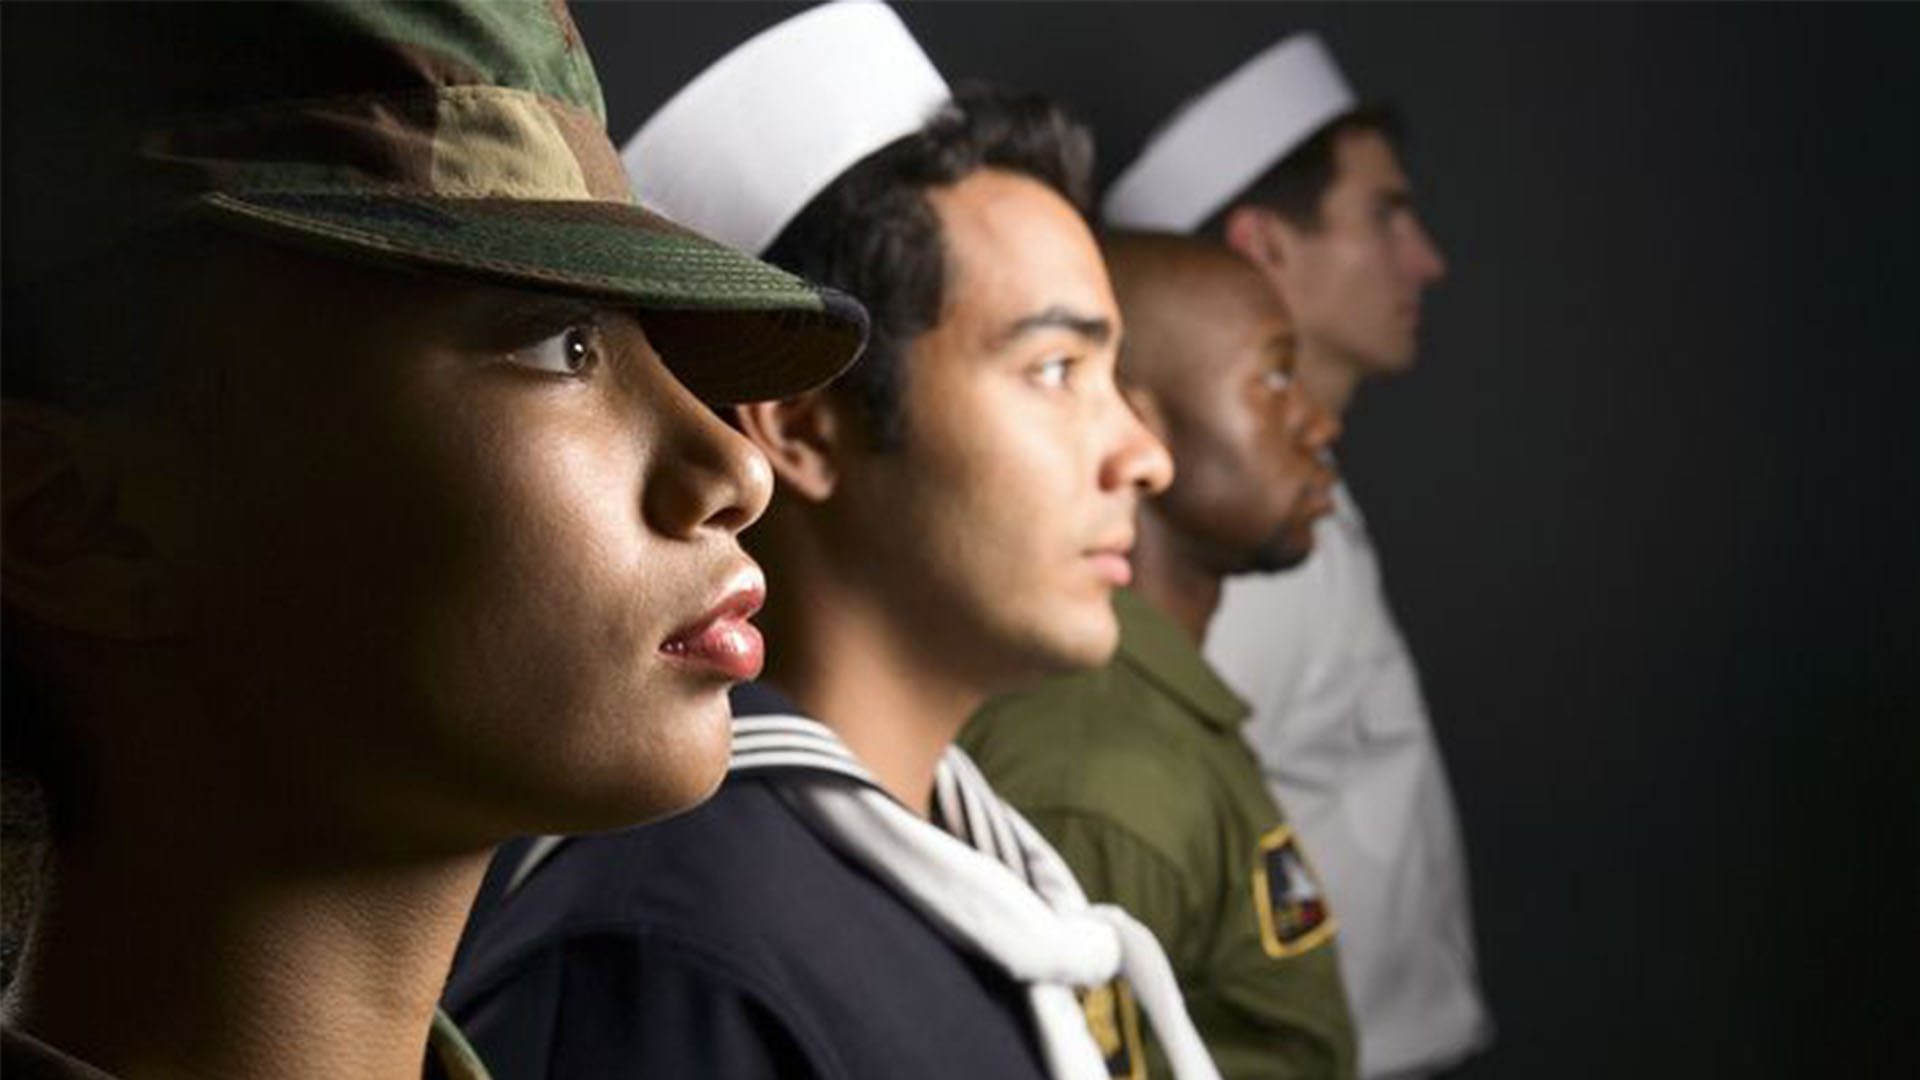 Four people in various military uniforms standing in a row.